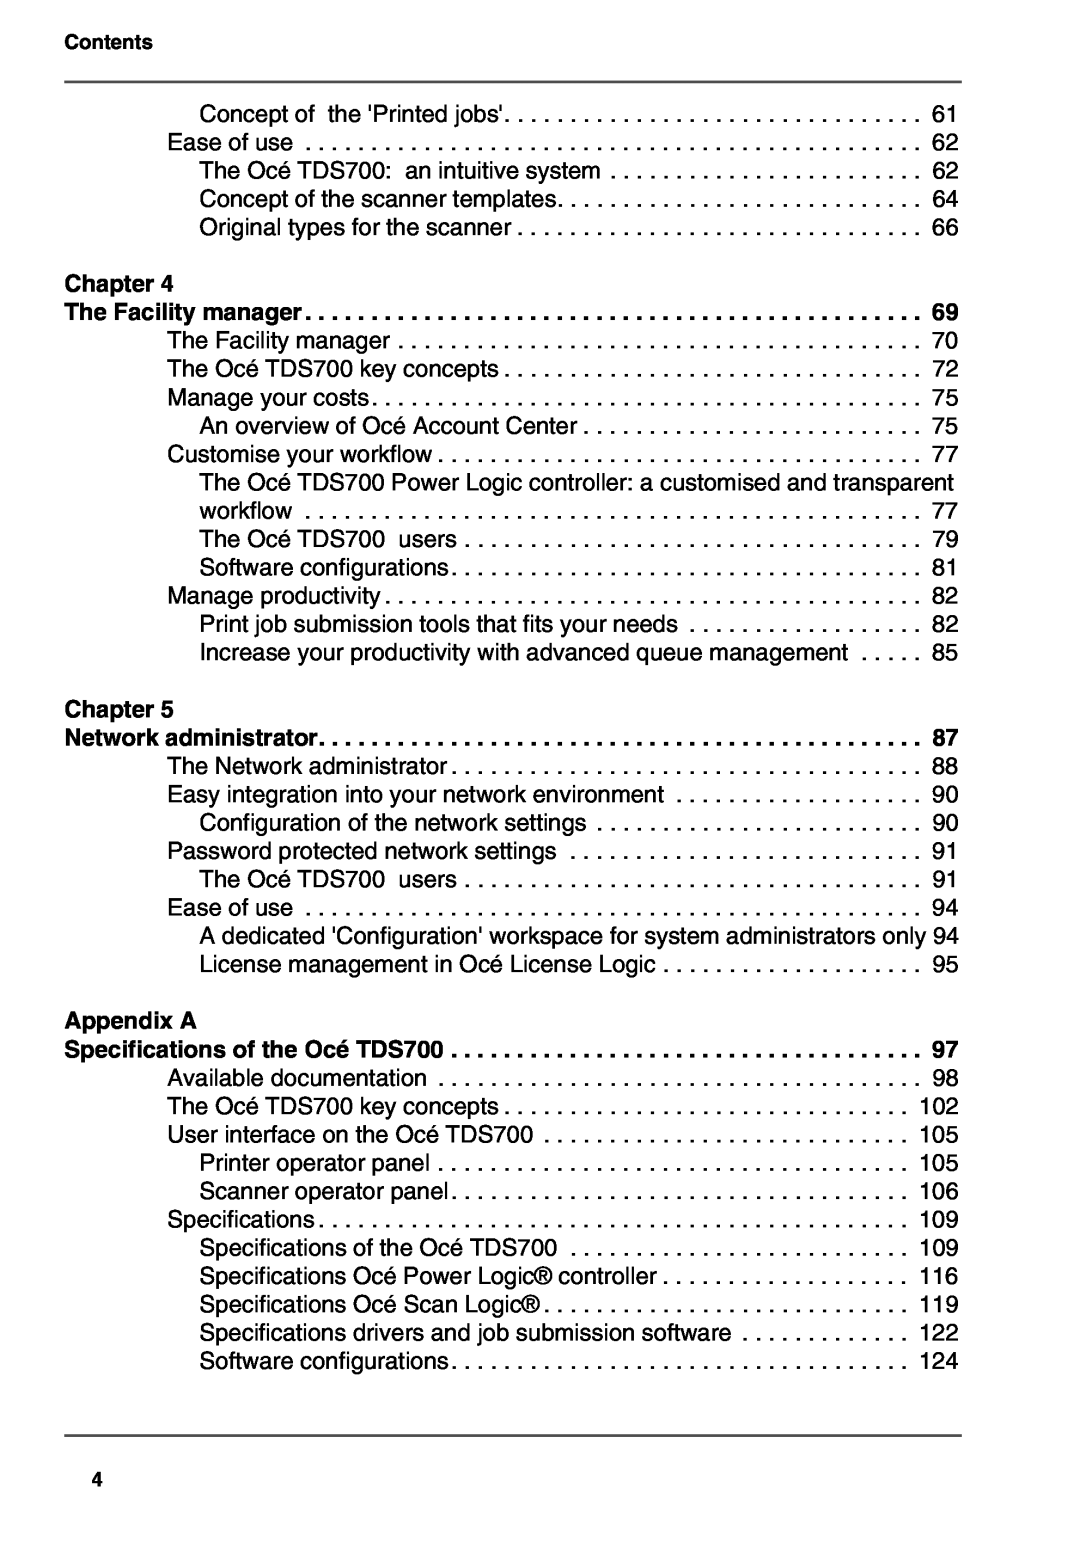 Oce North America TDS700 user manual Appendix A, Chapter 